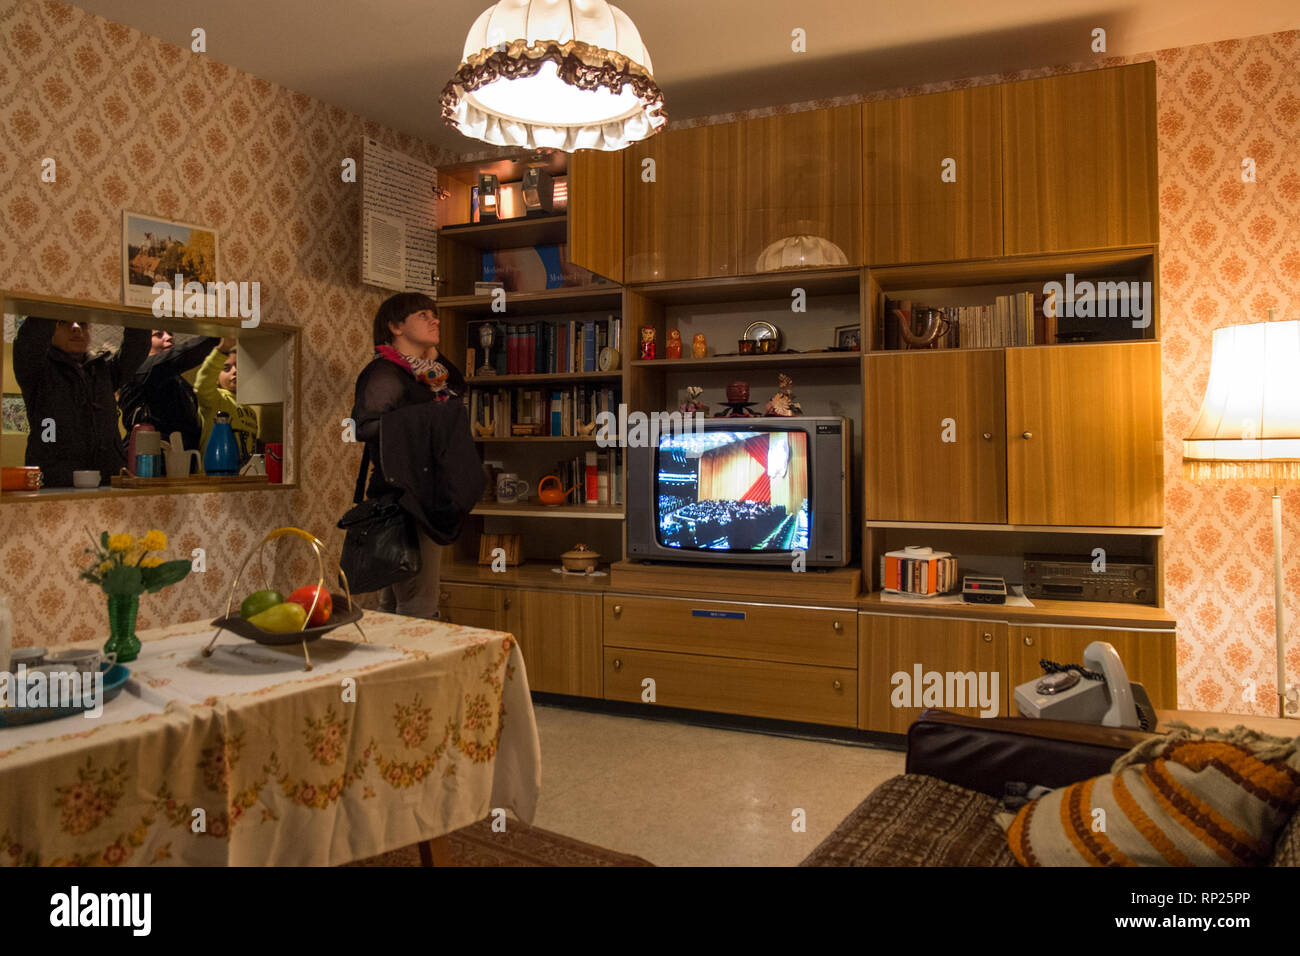 The DDR museum in Berlin, Germany. You can see how an East Germany family lived under Communism. Stock Photo